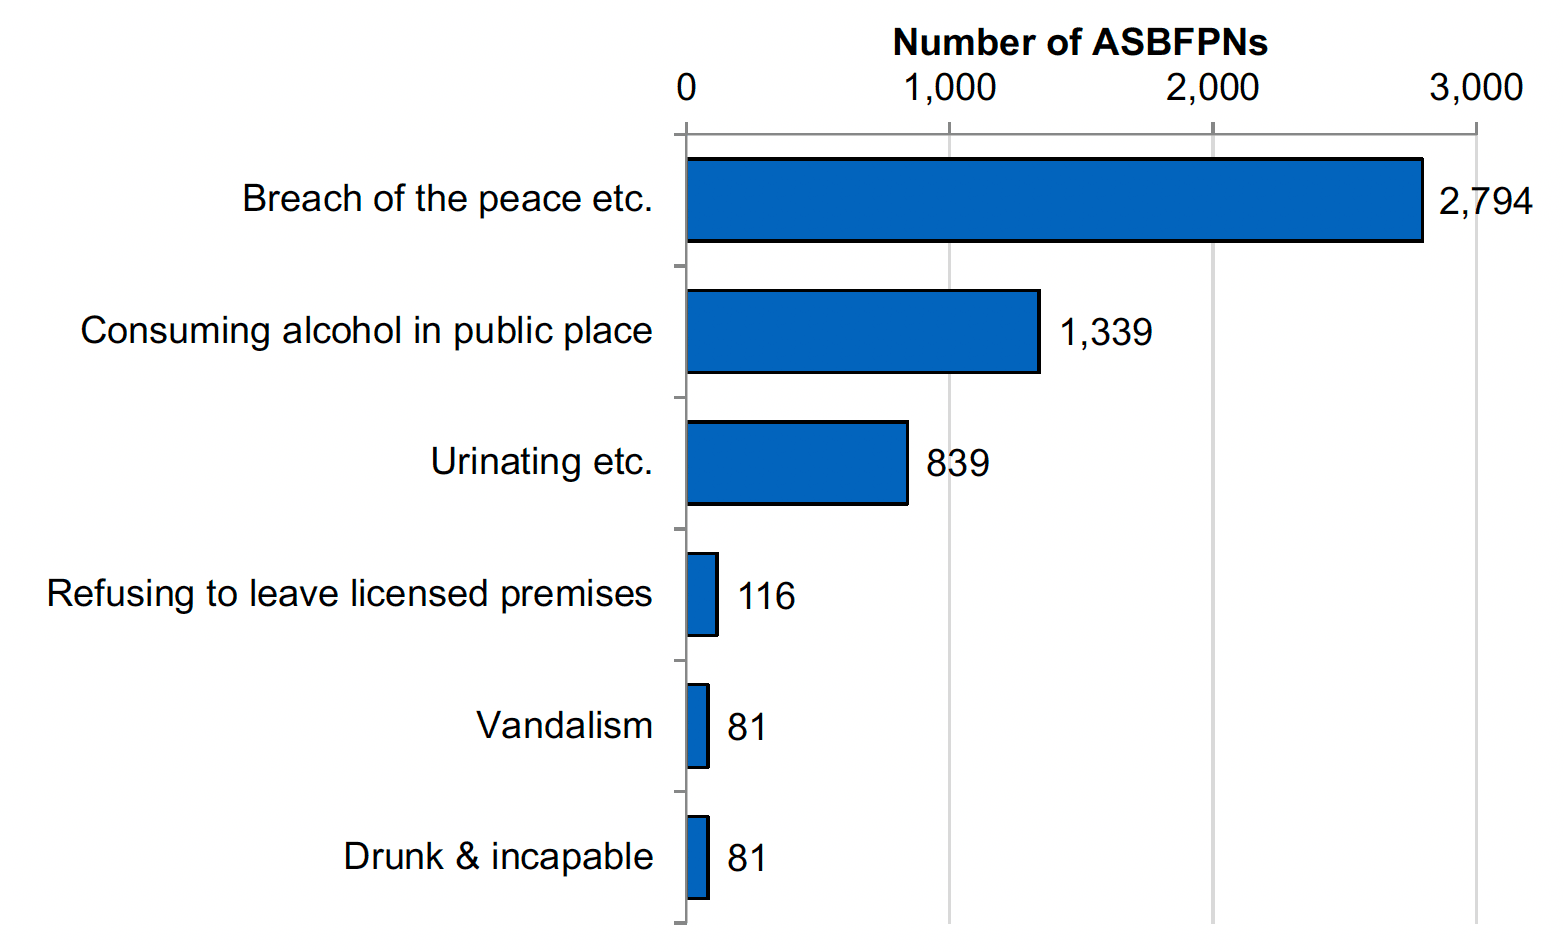 Bar chart showing the most common offences for ASBFPNs in 2021-22, the highest being for Breach of the peace etc. (2,794) and Consuming alcohol in a public place (1,339).